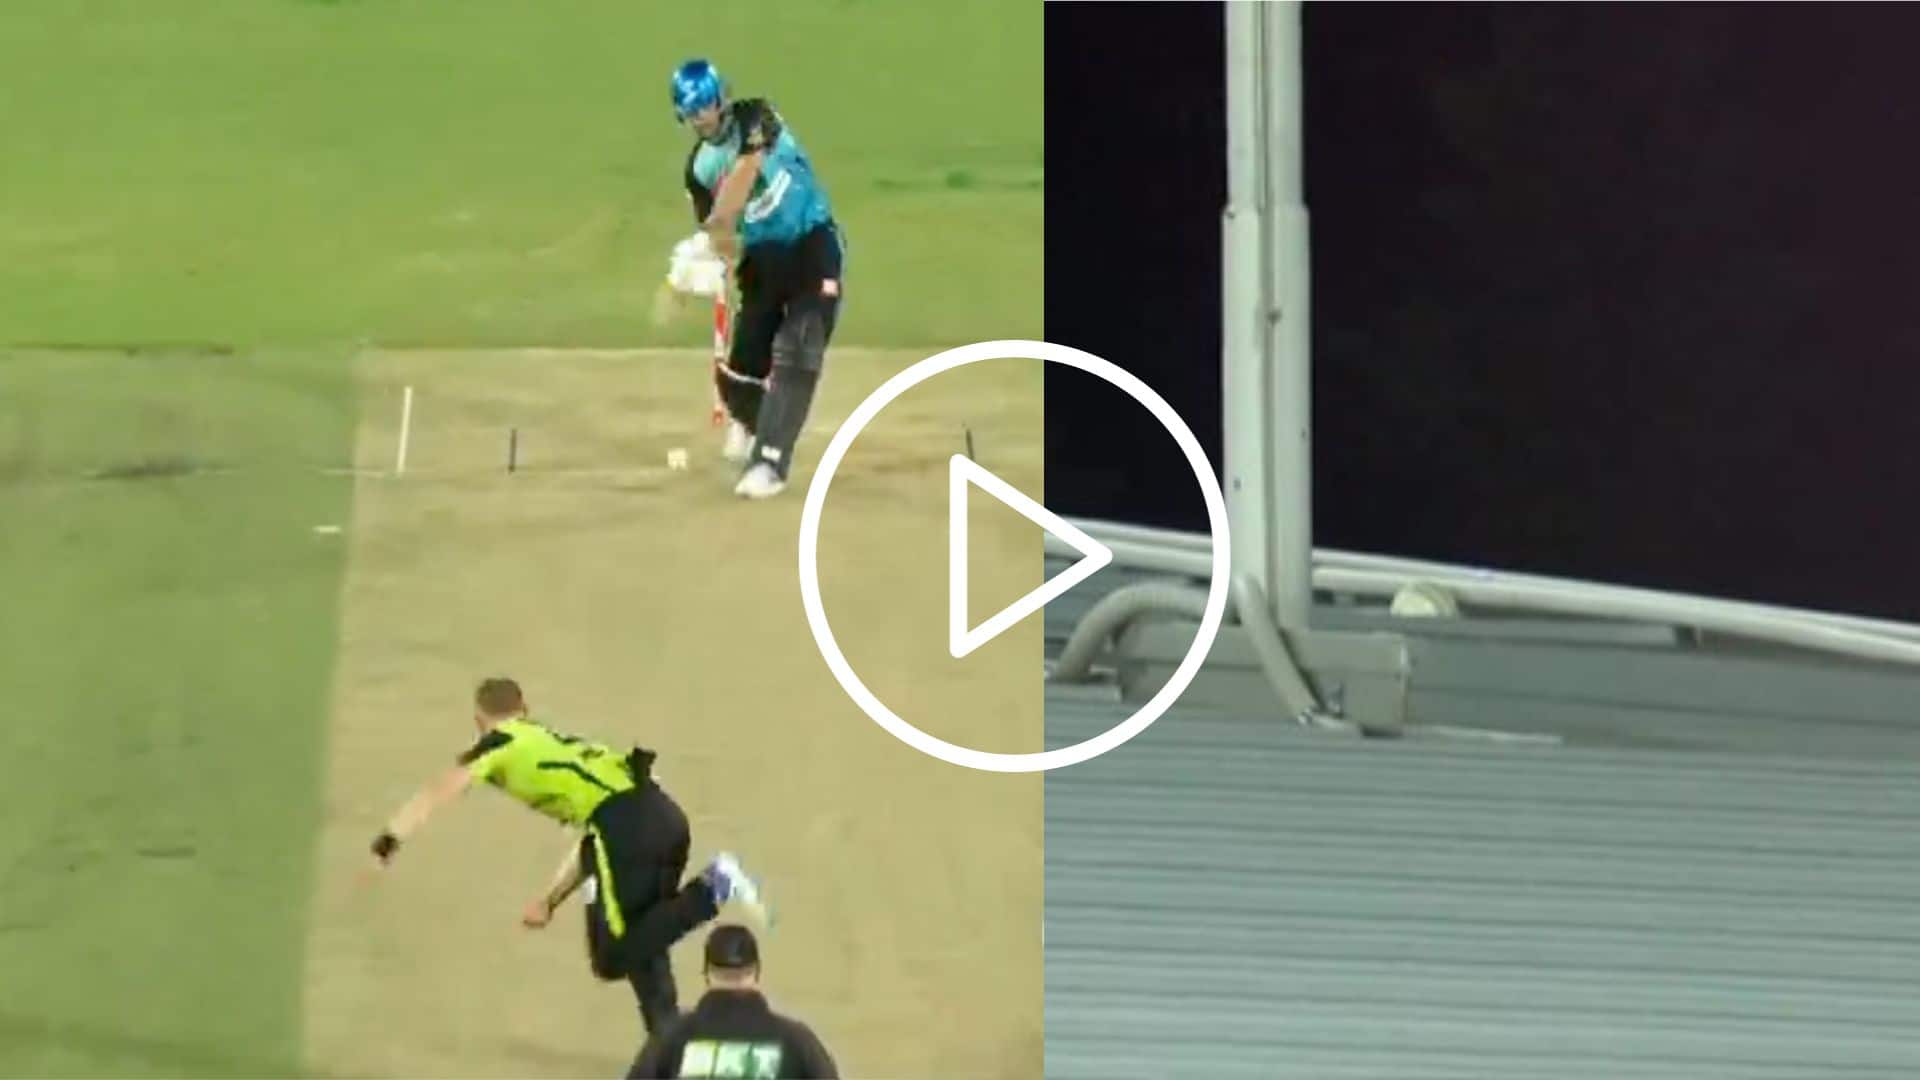 [Watch] Matthew Short Launches 'Huge Six' On The Roof Against Sydney Thunder